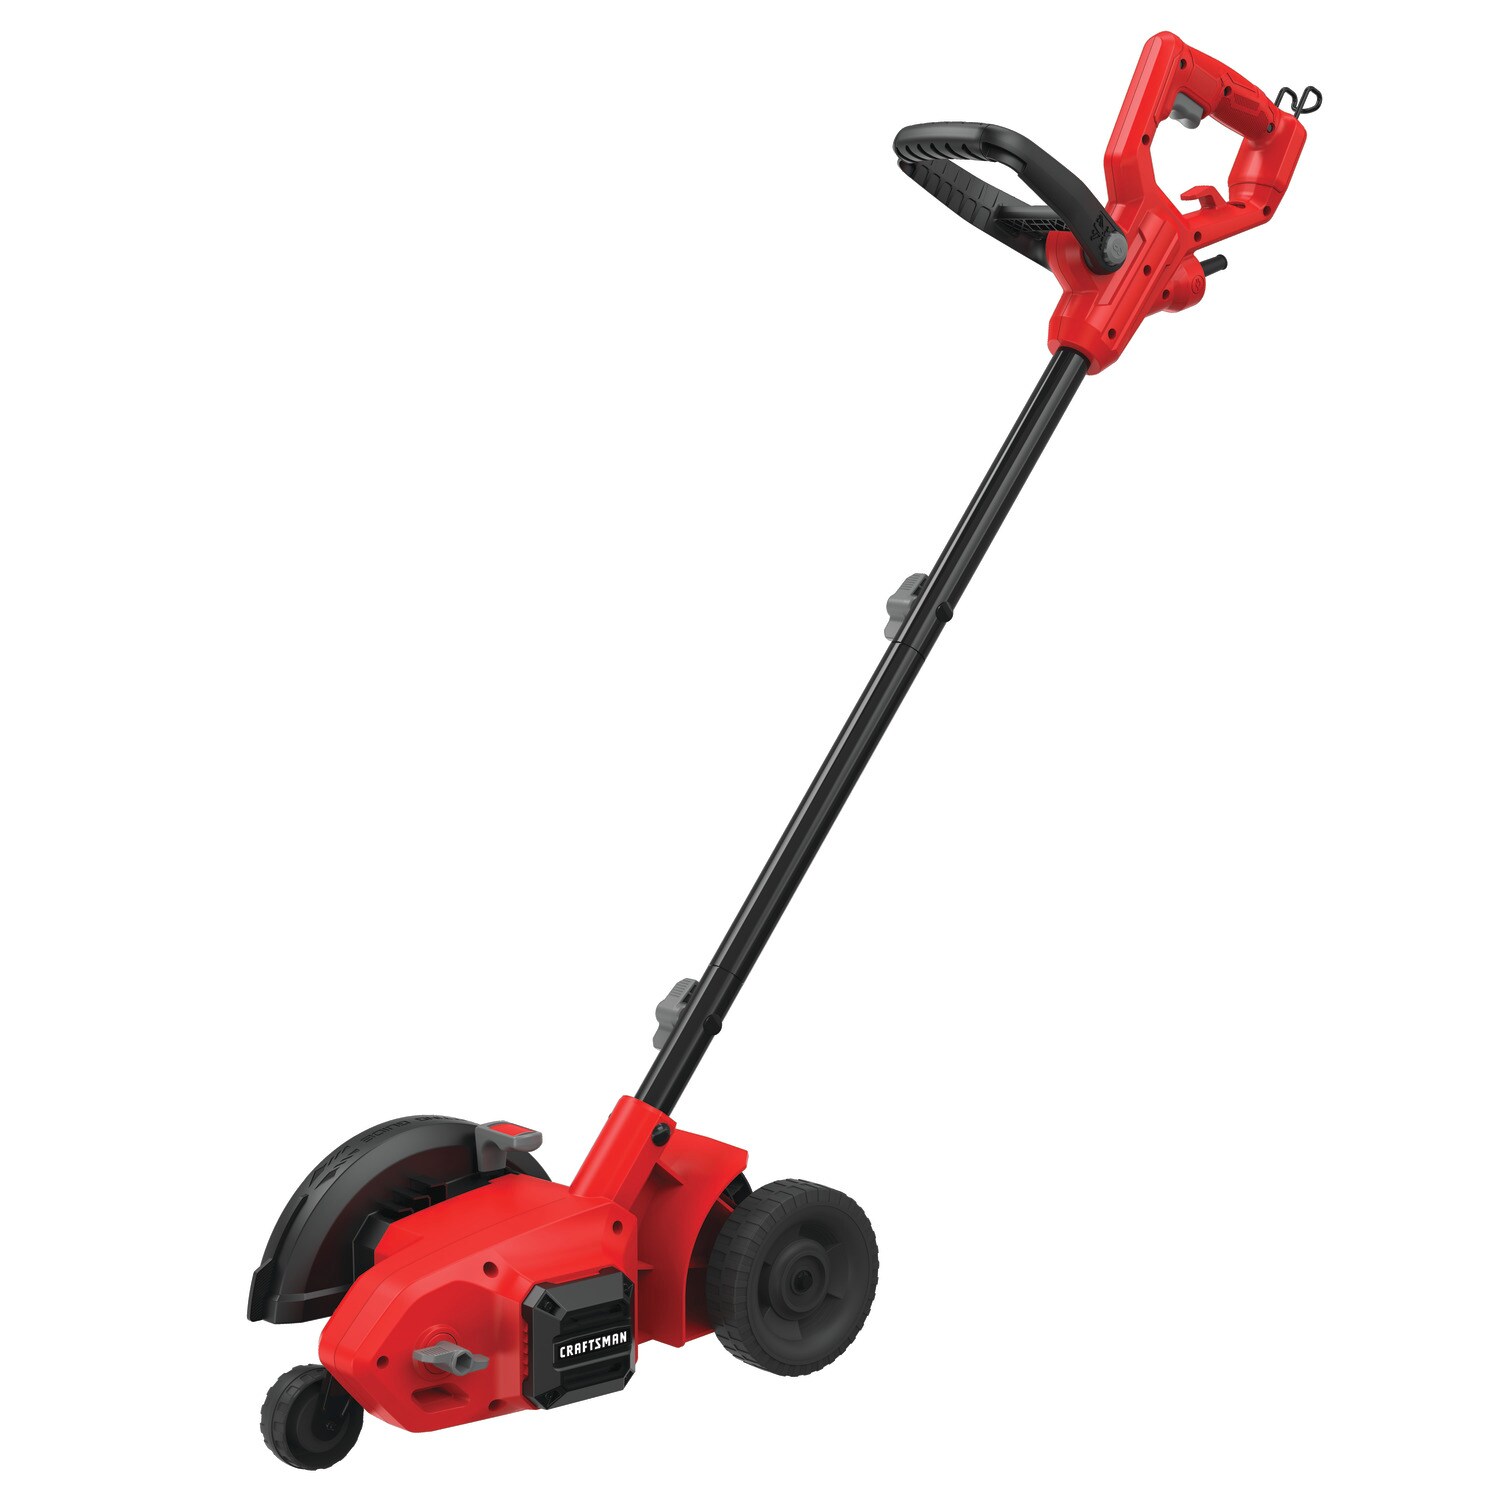 Black & Decker 7.5 in. 12-Amp Corded Electric Lawn Edger/Trencher